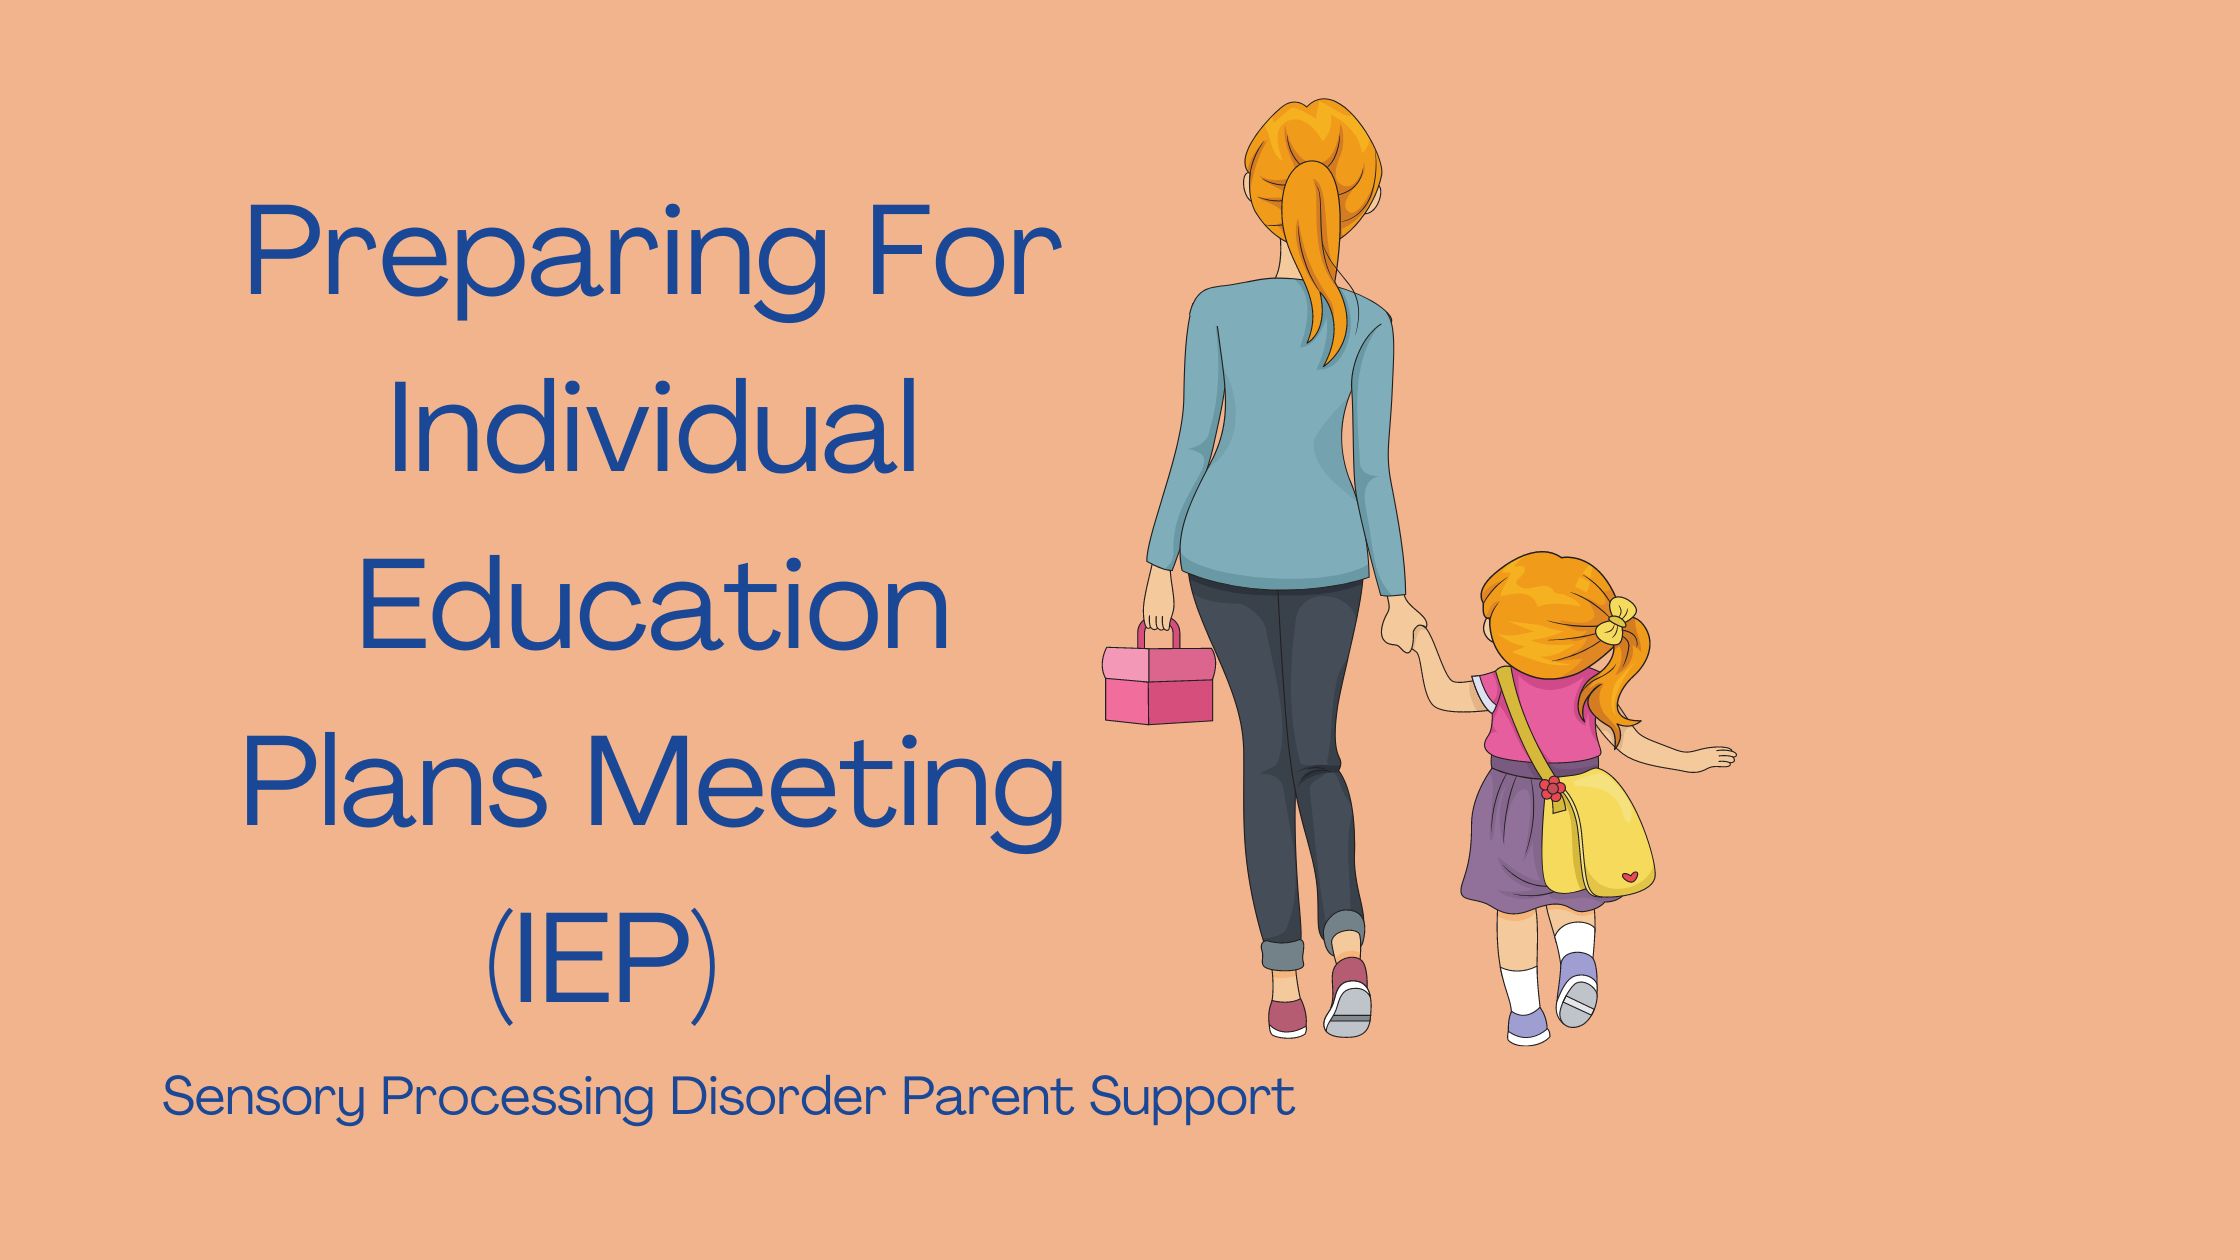 mom with child going to IEP meeting preparing for individual education plans meeting